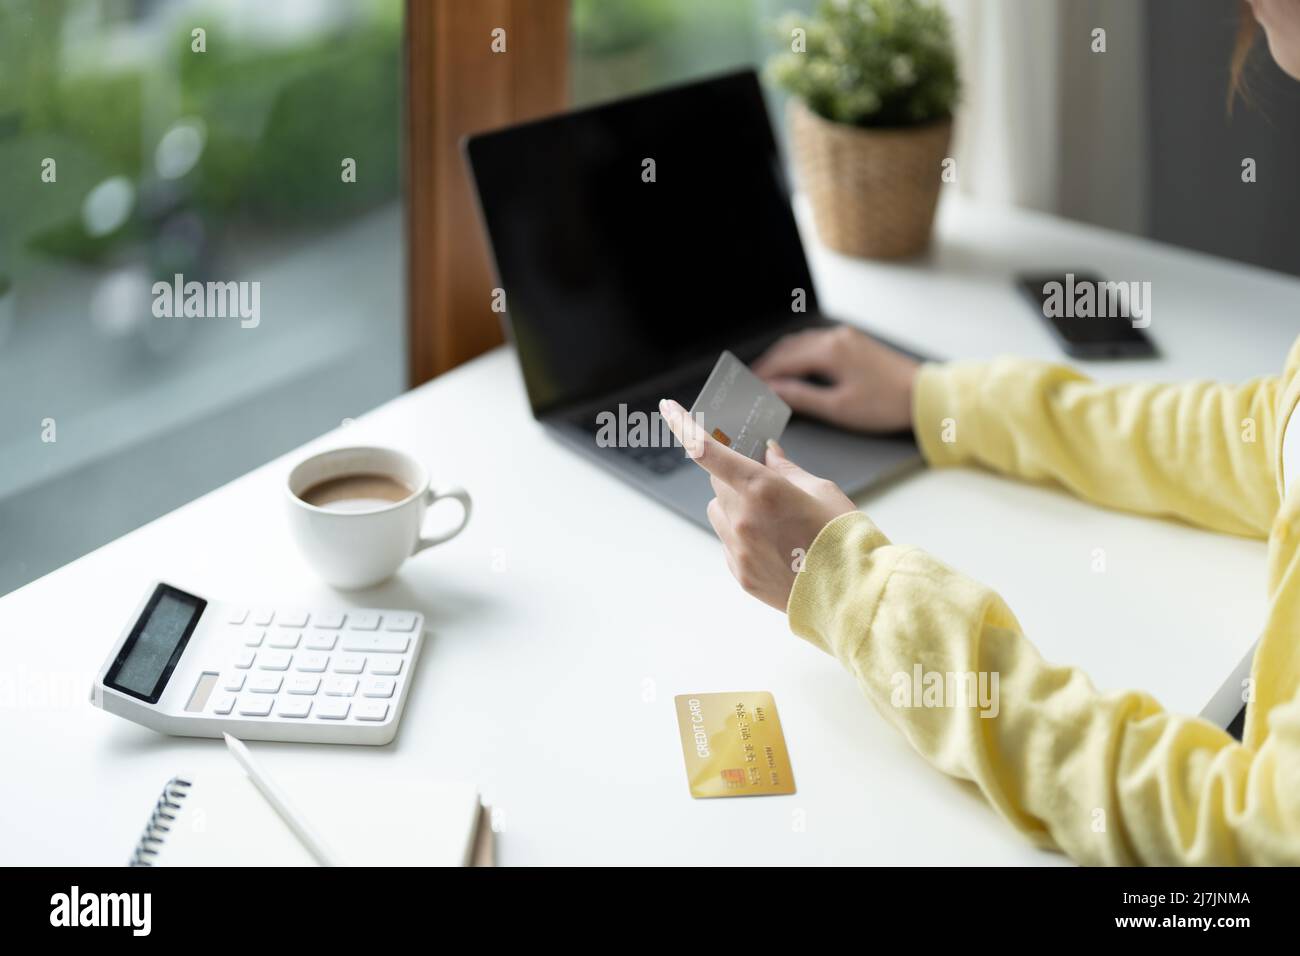 Close up of girl hold bank credit card and type on laptop, shopping online using computer, buying goods or ordering online, entering bank accounts and Stock Photo